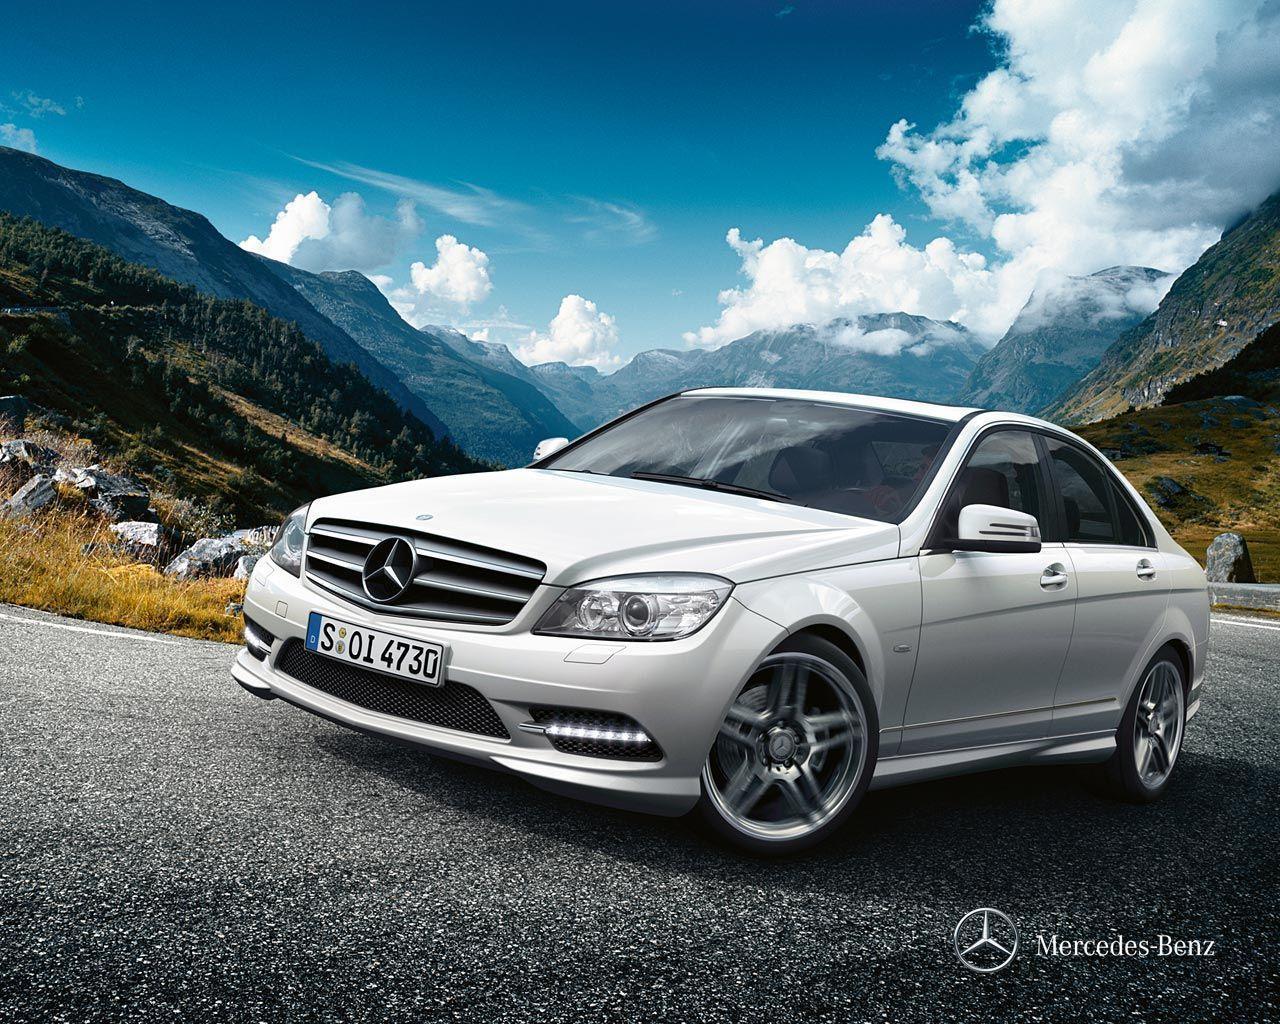 Mercedes Benz, Wallpapers and C class